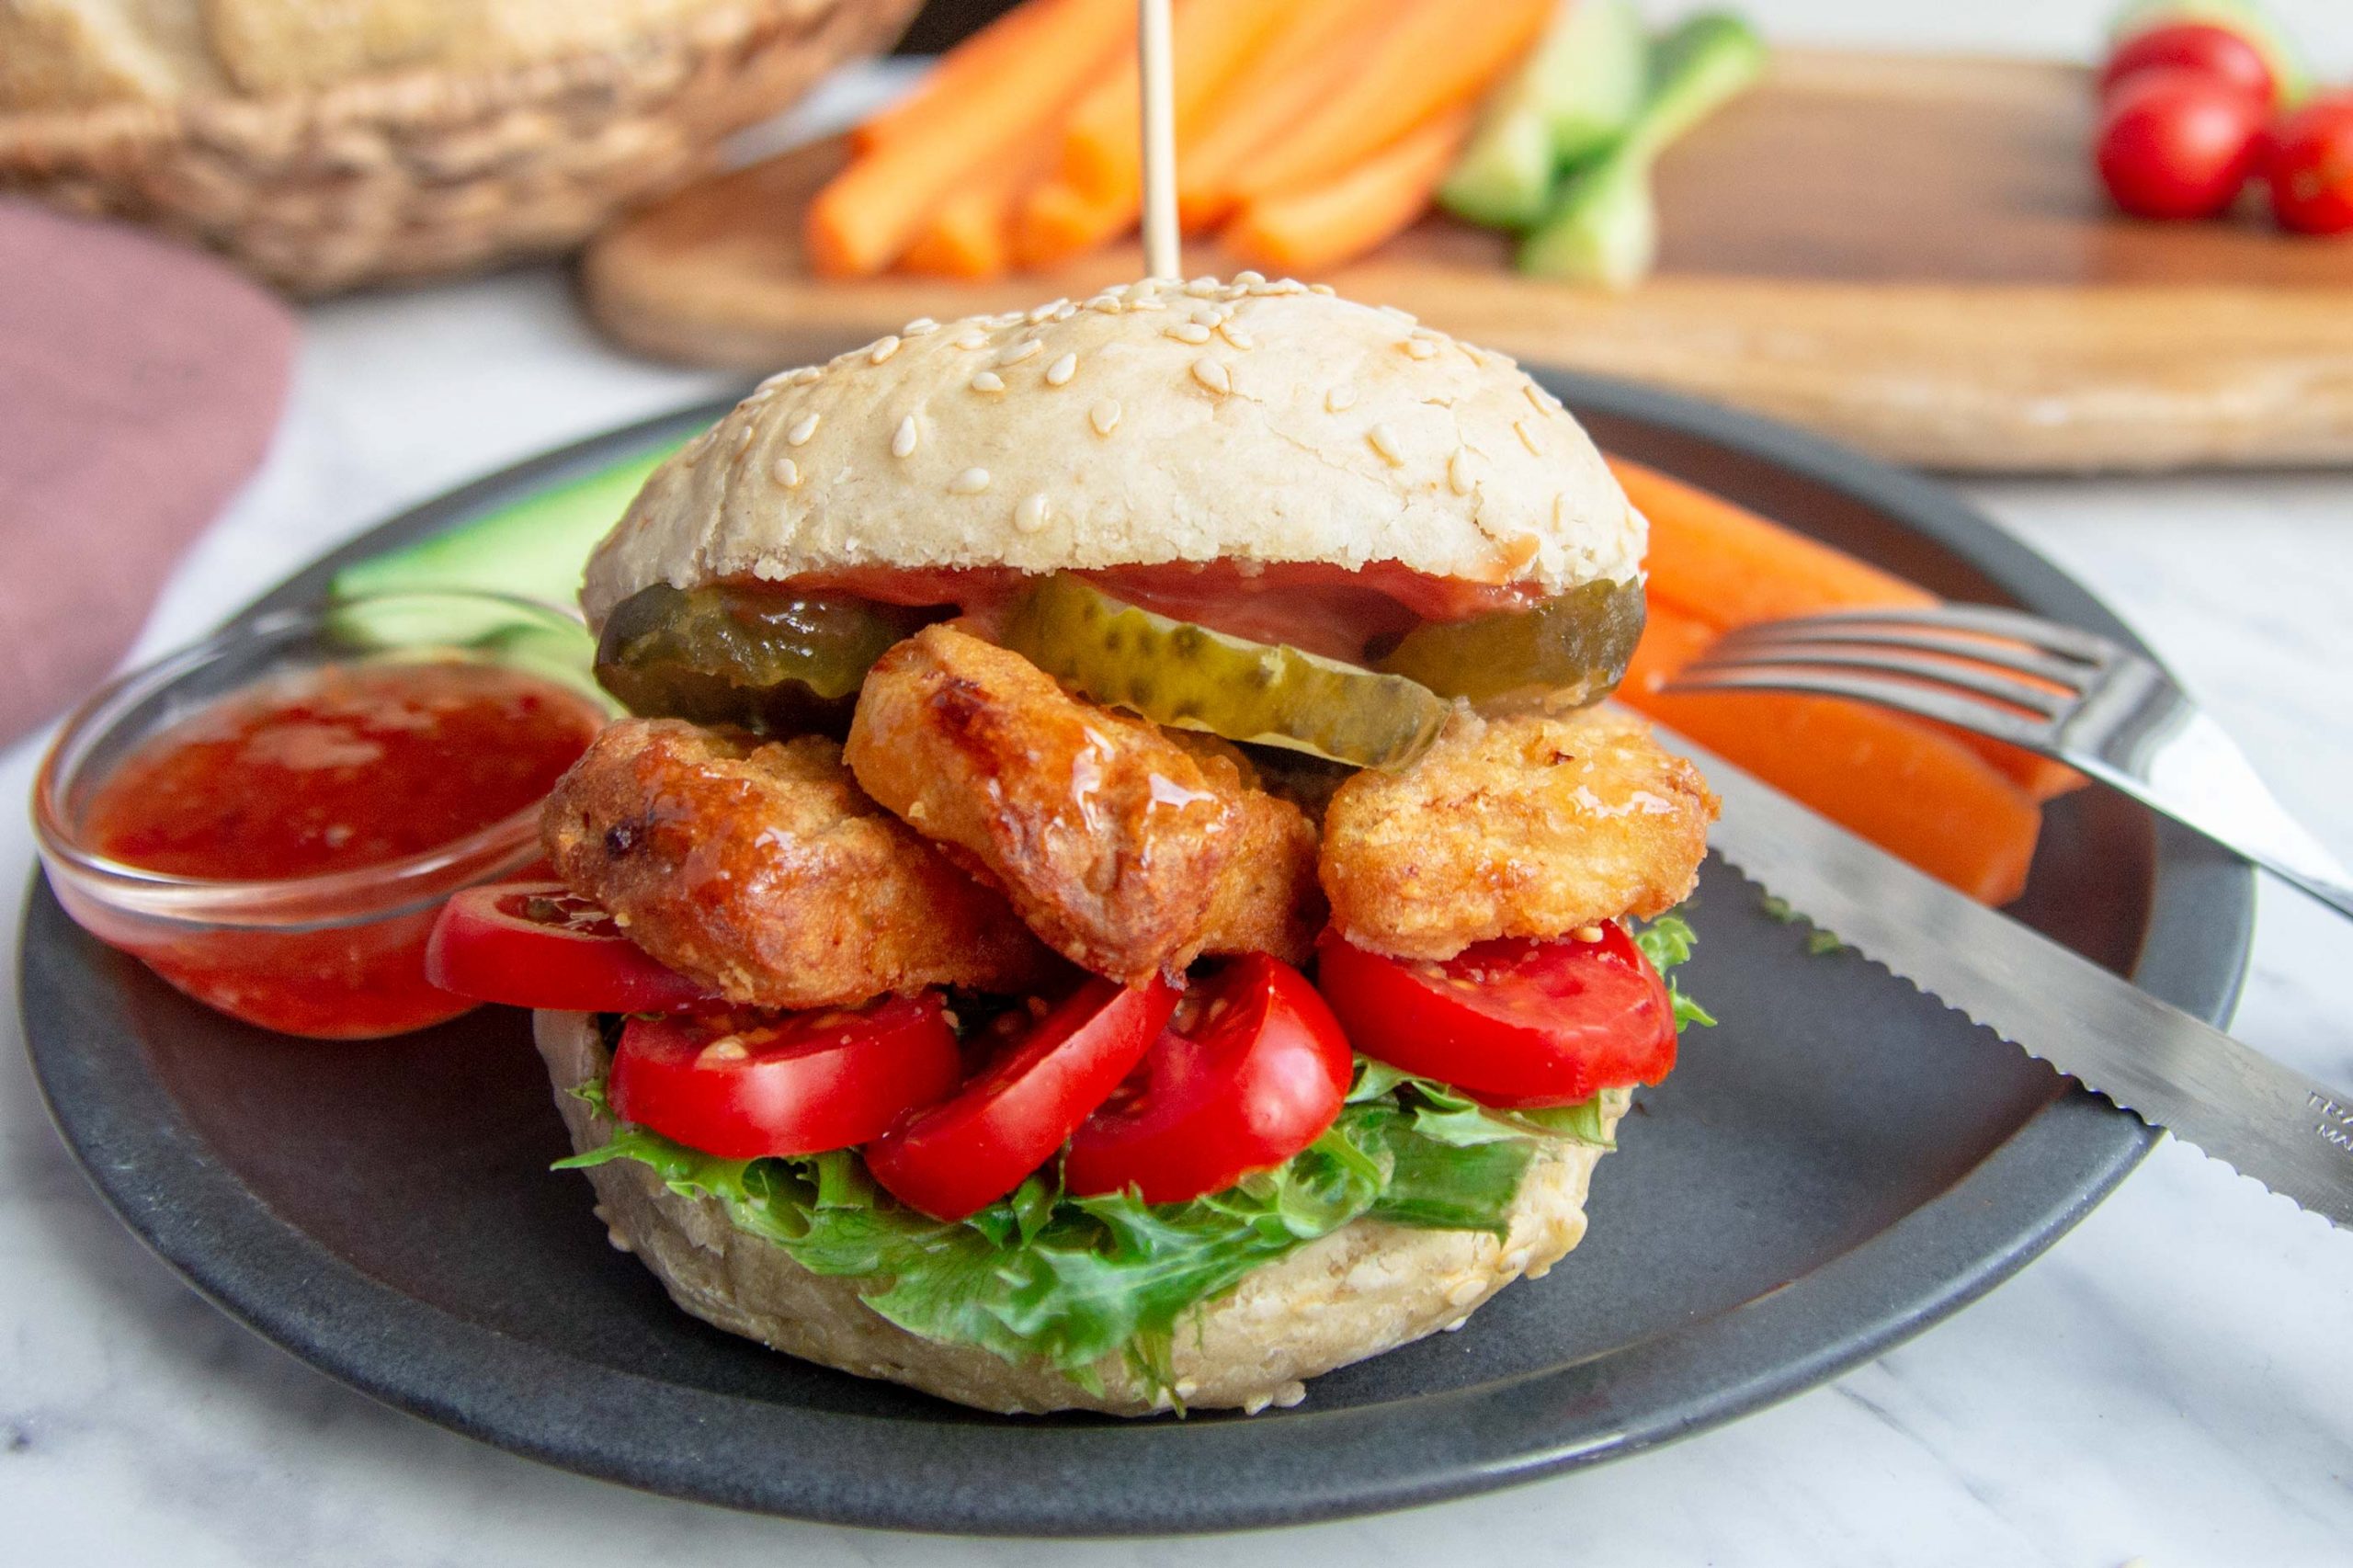 Easy chicken nugget burgers with snack veggies on the side